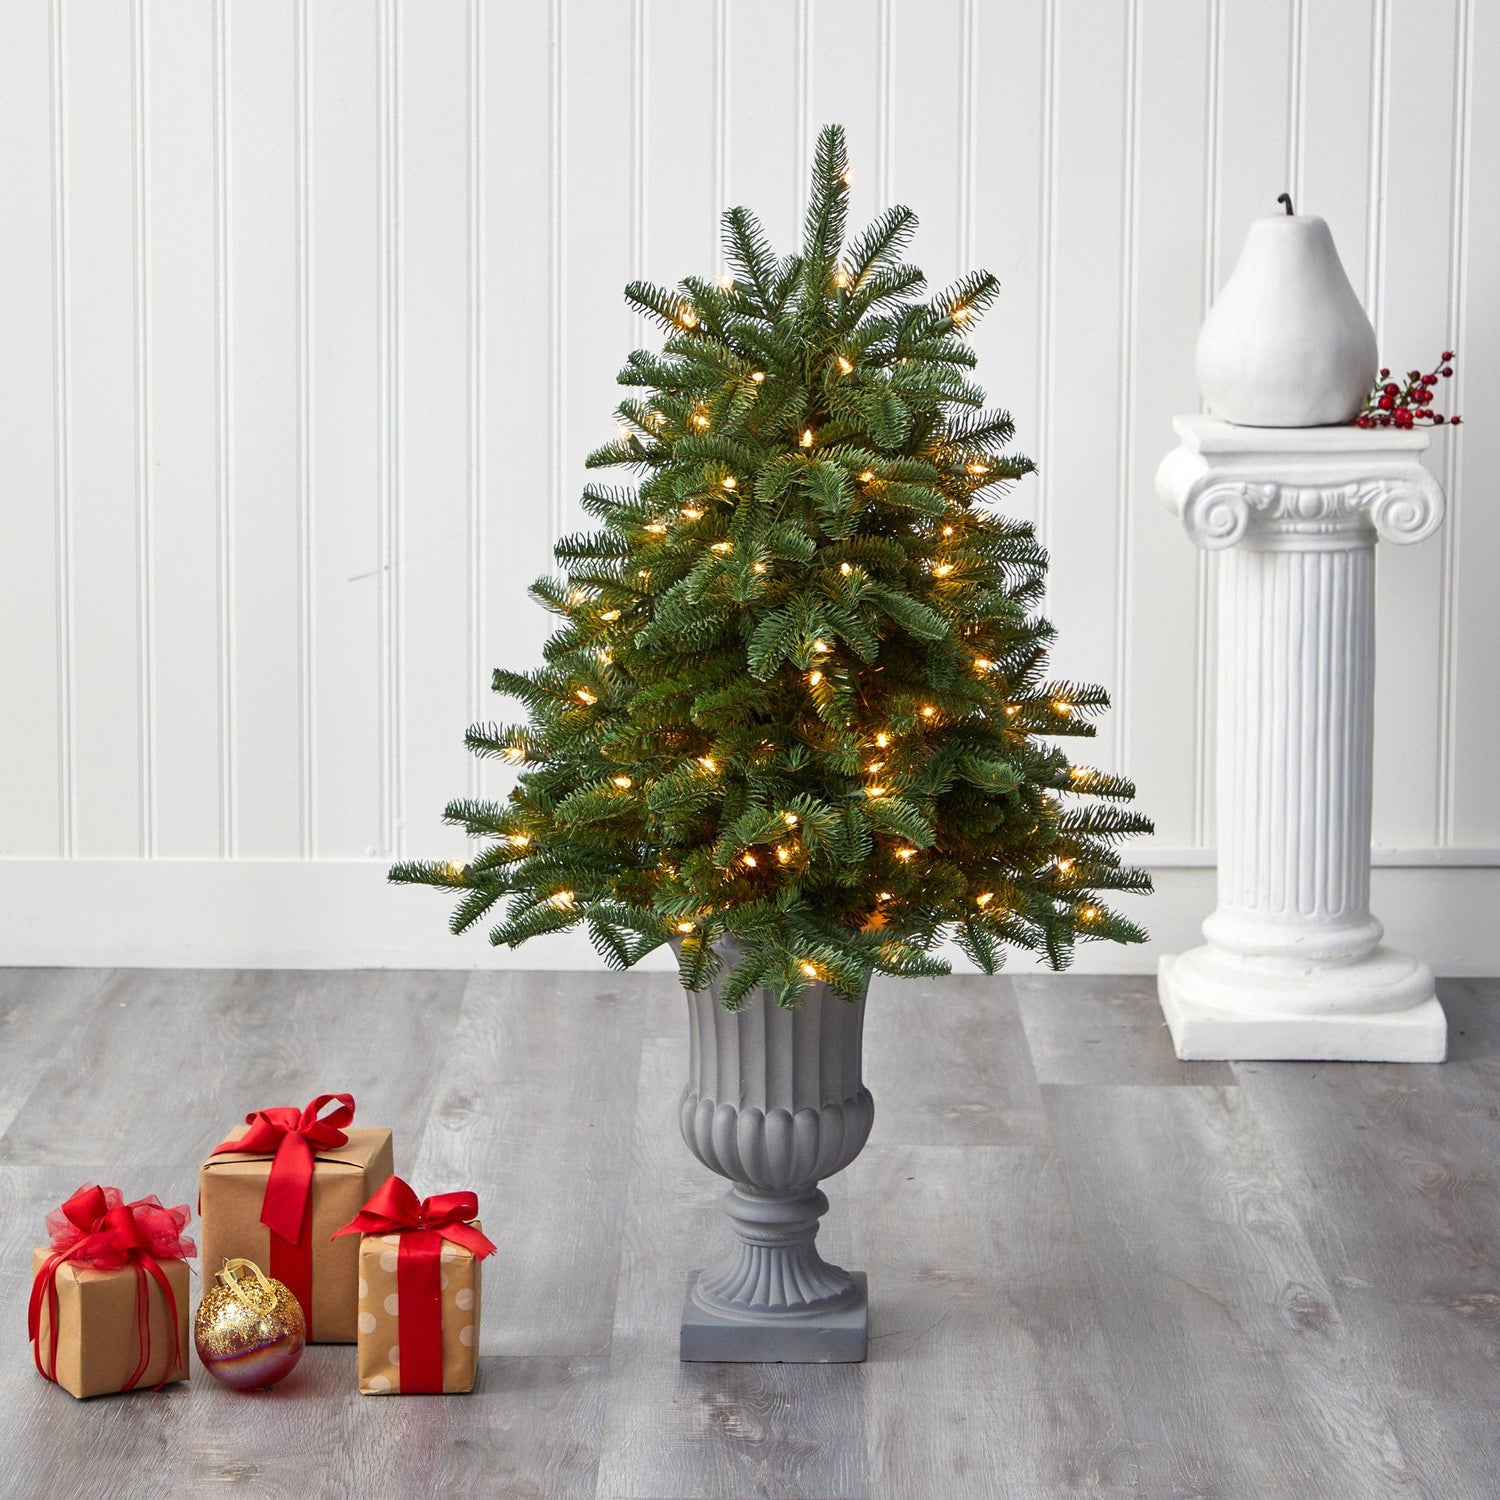 3.5’ South Carolina Spruce Artificial Christmas Tree with 100 White Warm Light and 458 Bendable Branches in Decorative Urn